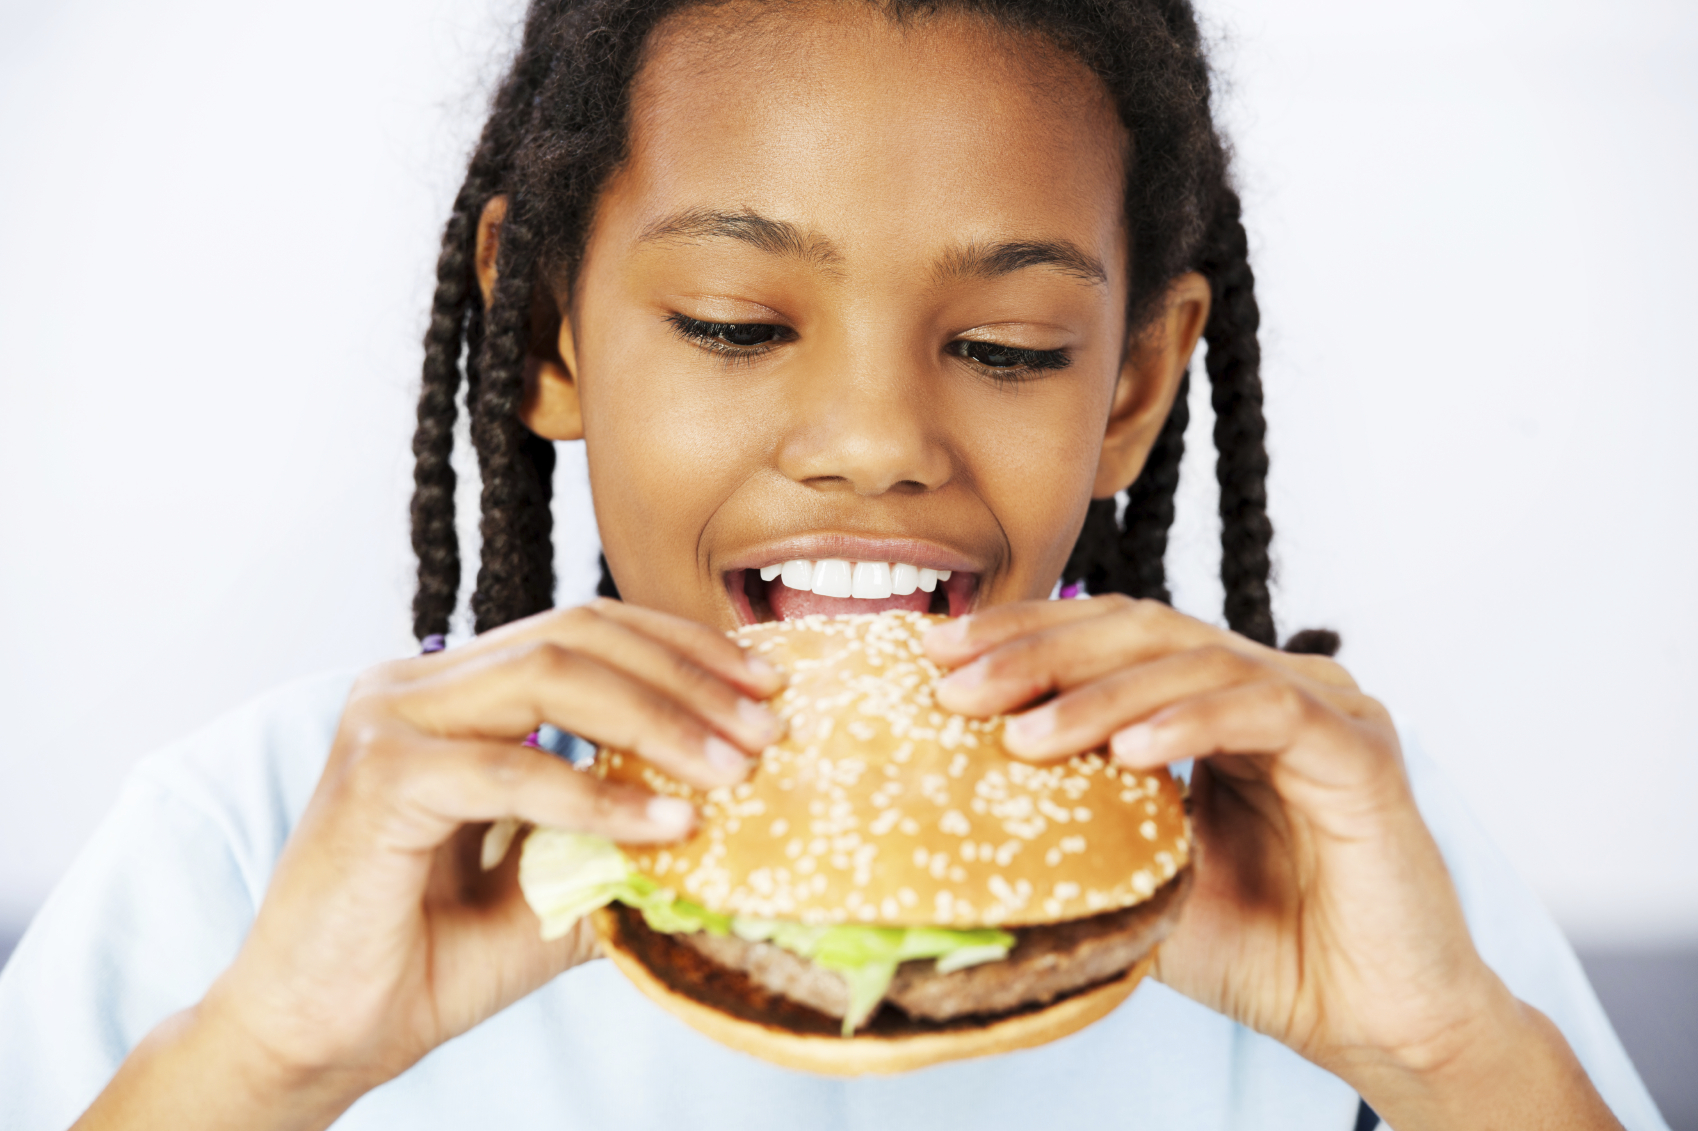 Say it discover. African eat Burger. Children eat fast food. Child Burger. A girl is eating Junk food.